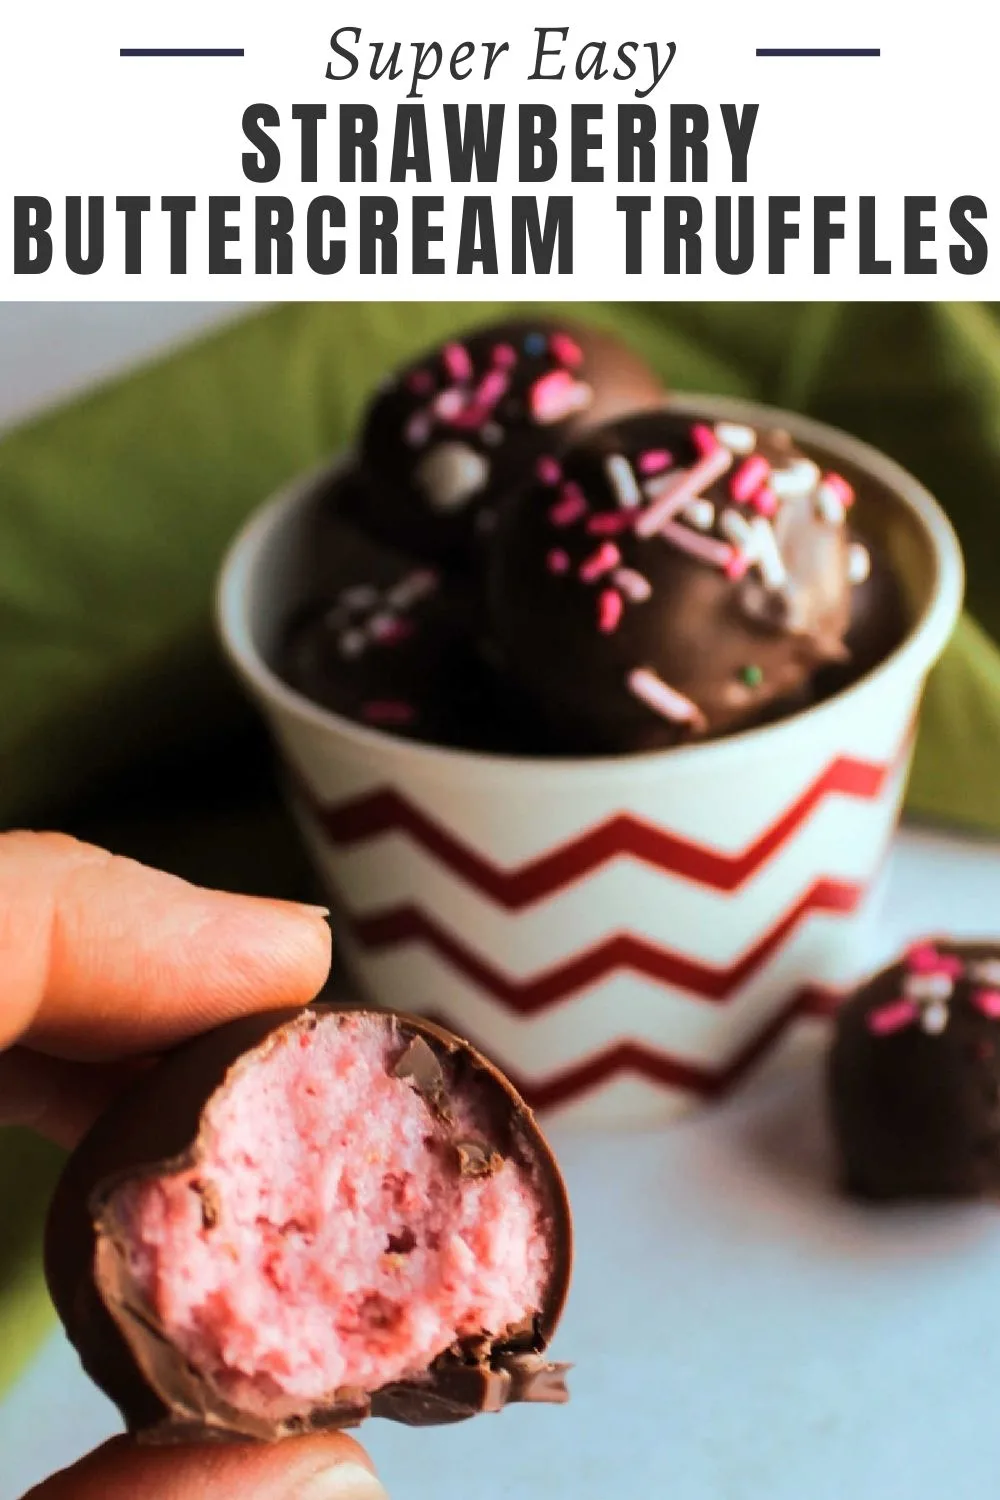 What do you do when you have leftover frosting? Make truffles of course! These chocolate coated strawberry buttercream truffles taste amazing but this recipe can easily be adapted to so many flavor profiles.